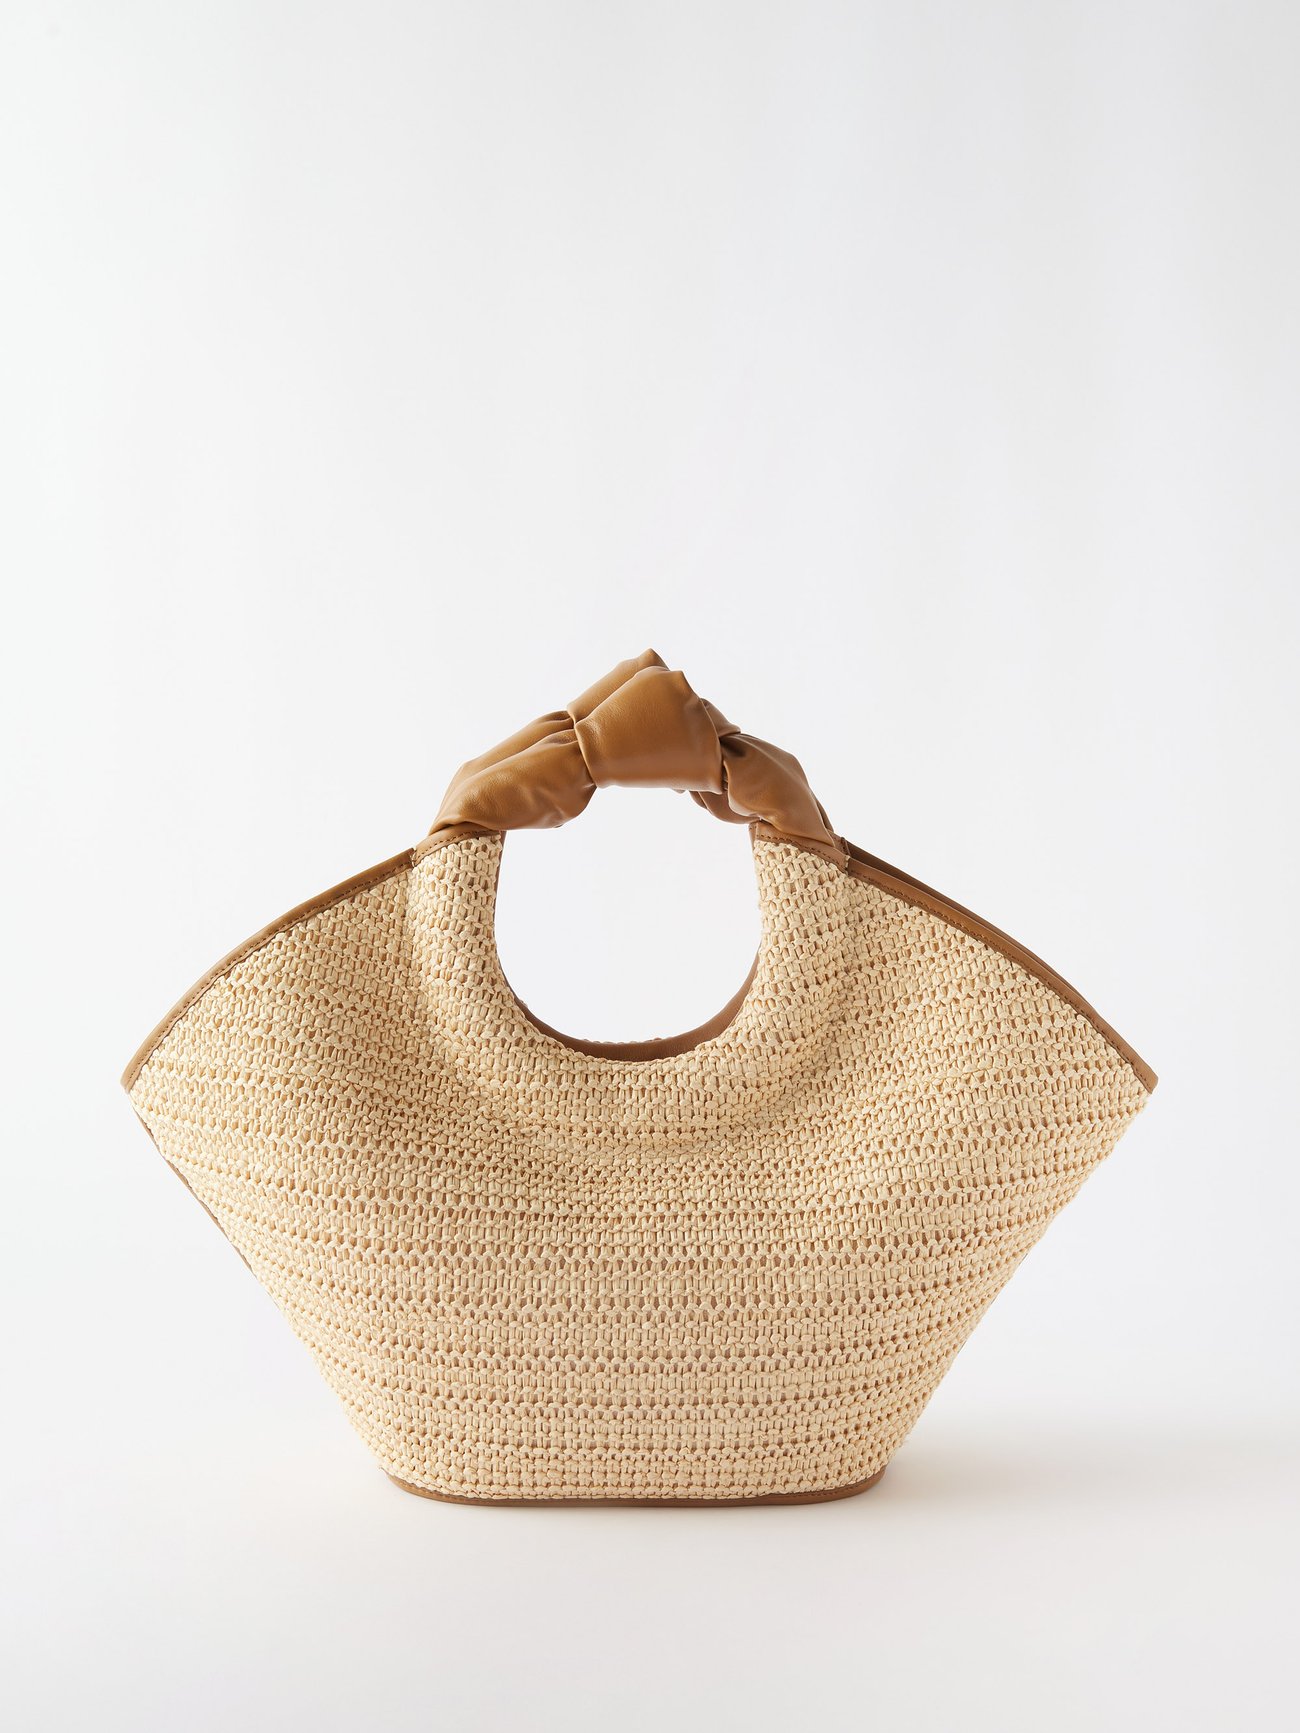 Alqueria Leather-Trimmed Straw Tote By Hereu